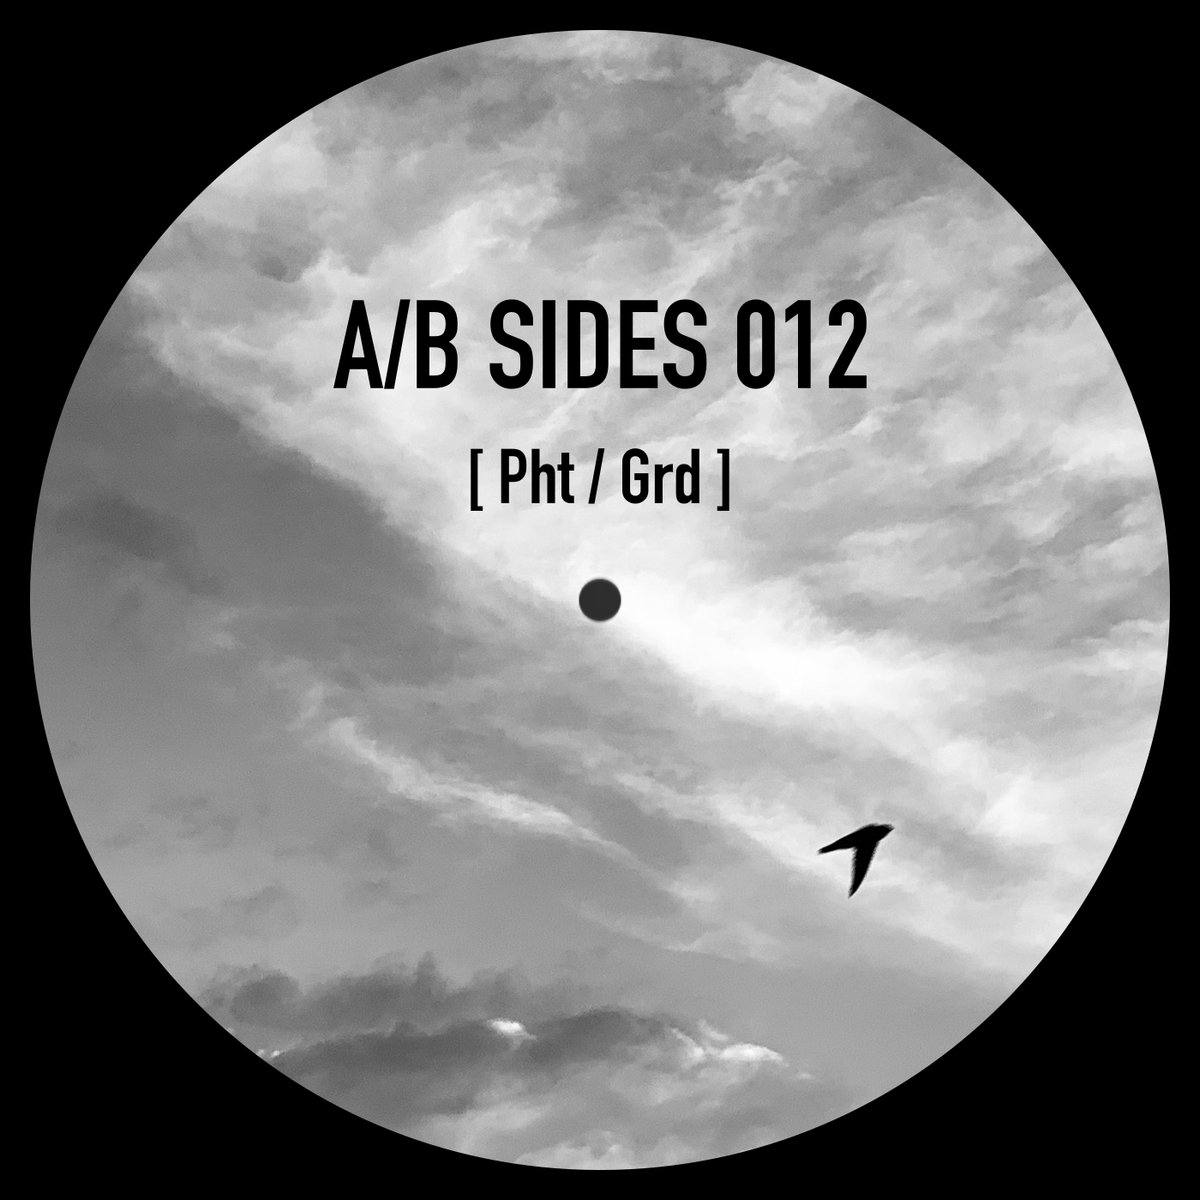 image cover: A/B Sides - A/B Sides 012 / A/B Sides